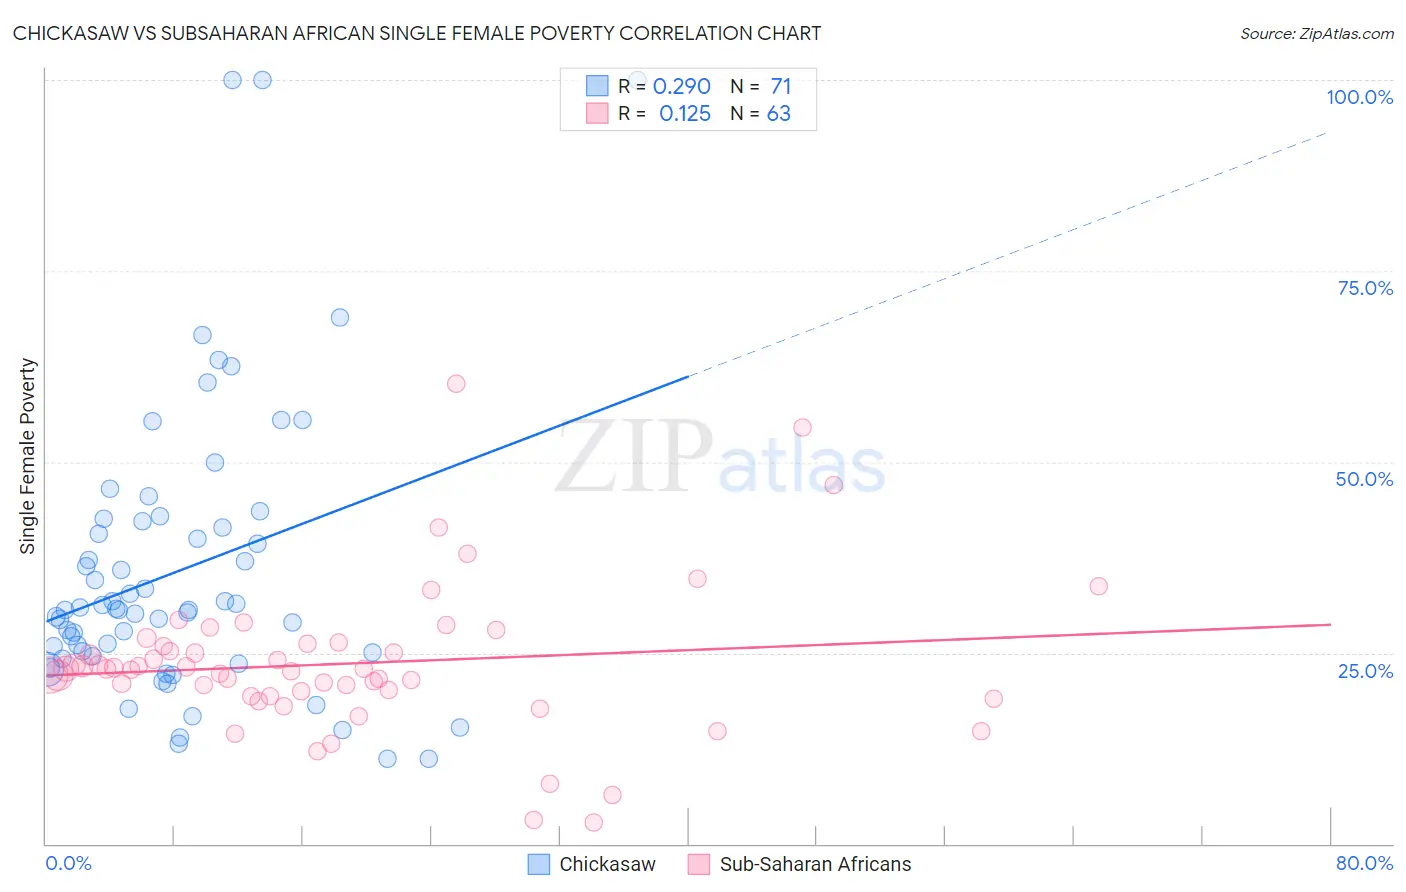 Chickasaw vs Subsaharan African Single Female Poverty